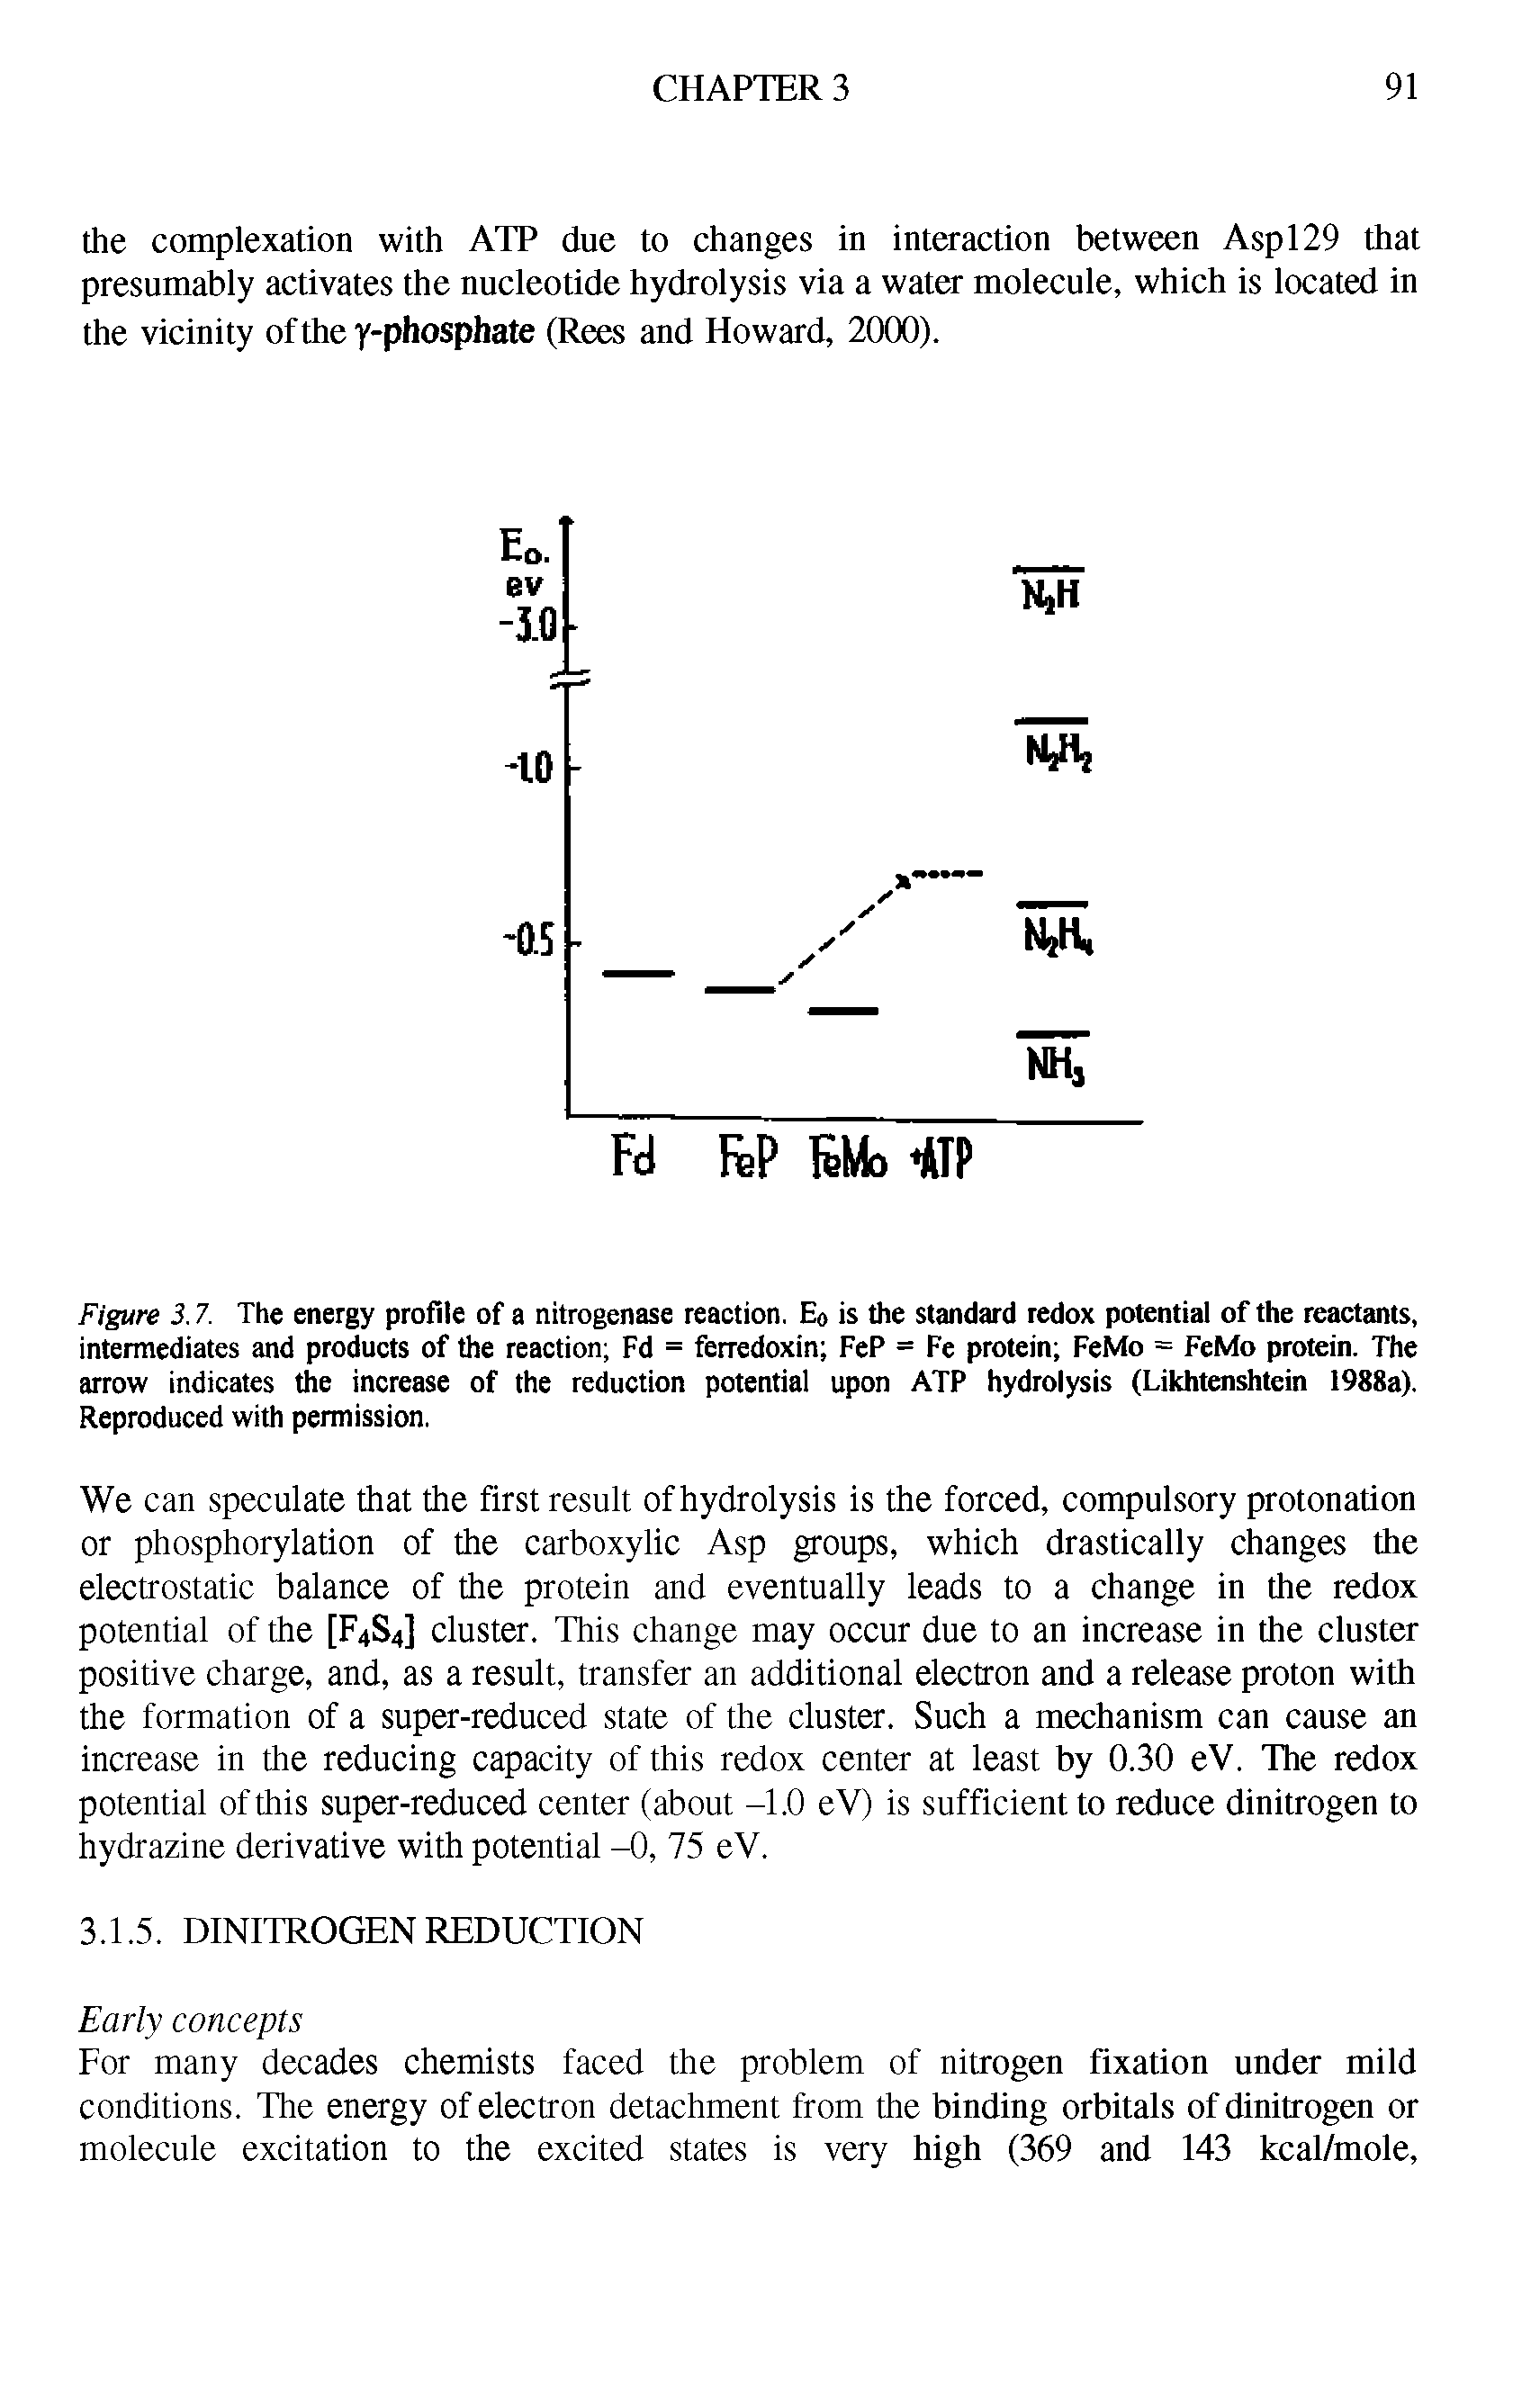 Figure 3.7. The energy profile of a nitrogenase reaction. Eo is the standard redox potential of the reactants, intermediates and products of the reaction Fd = ferredoxin FeP = Fe protein FeMo = FeMo protein. The arrow indicates the increase of the reduction potential upon ATP hydrolysis (Likhtenshtein 1988a). Reproduced with permission.